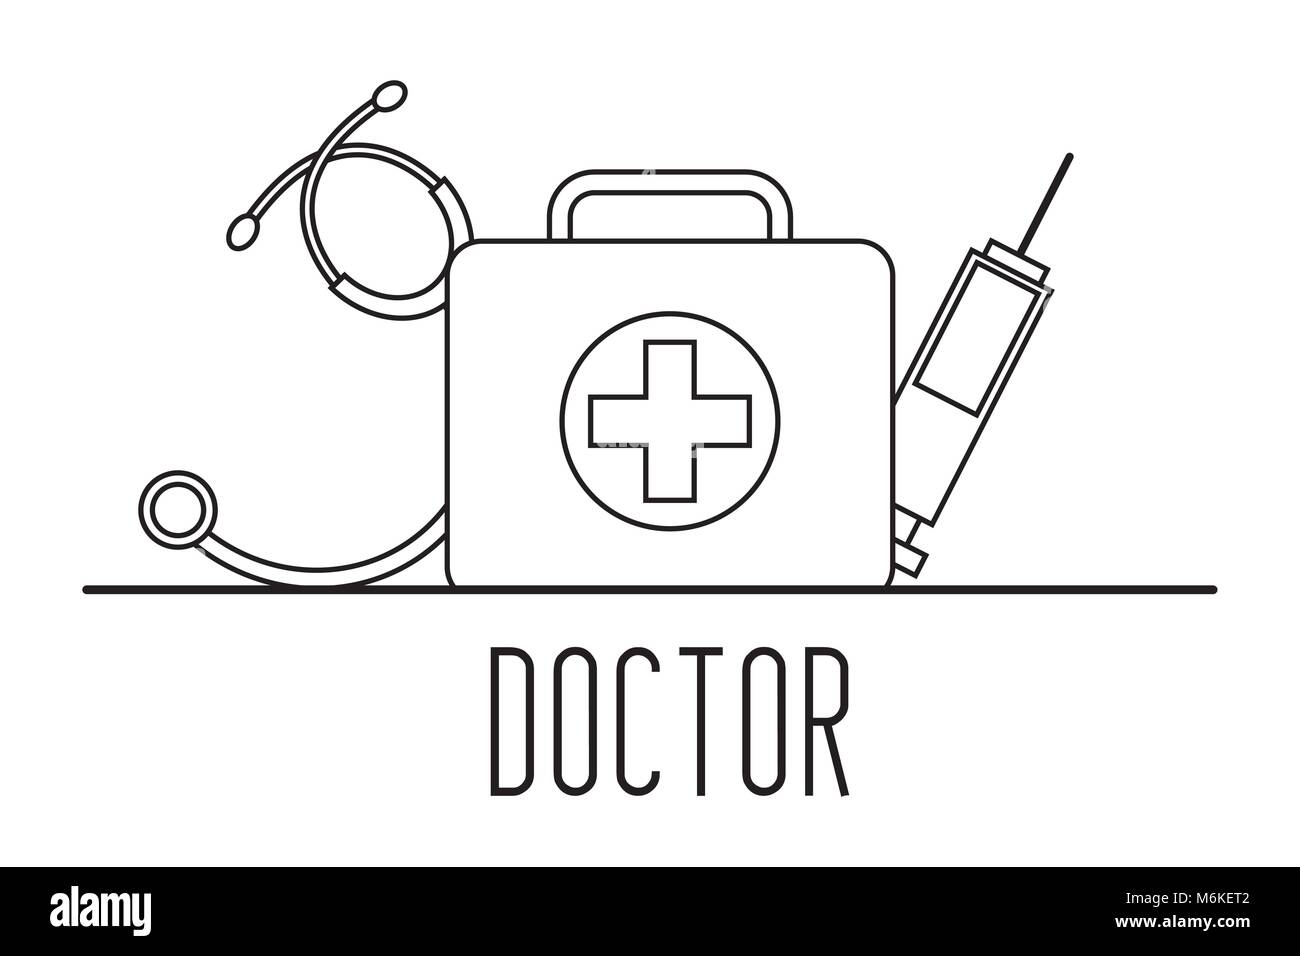 doctor profession first aid kit syringe stethoscope medicine Stock Vector